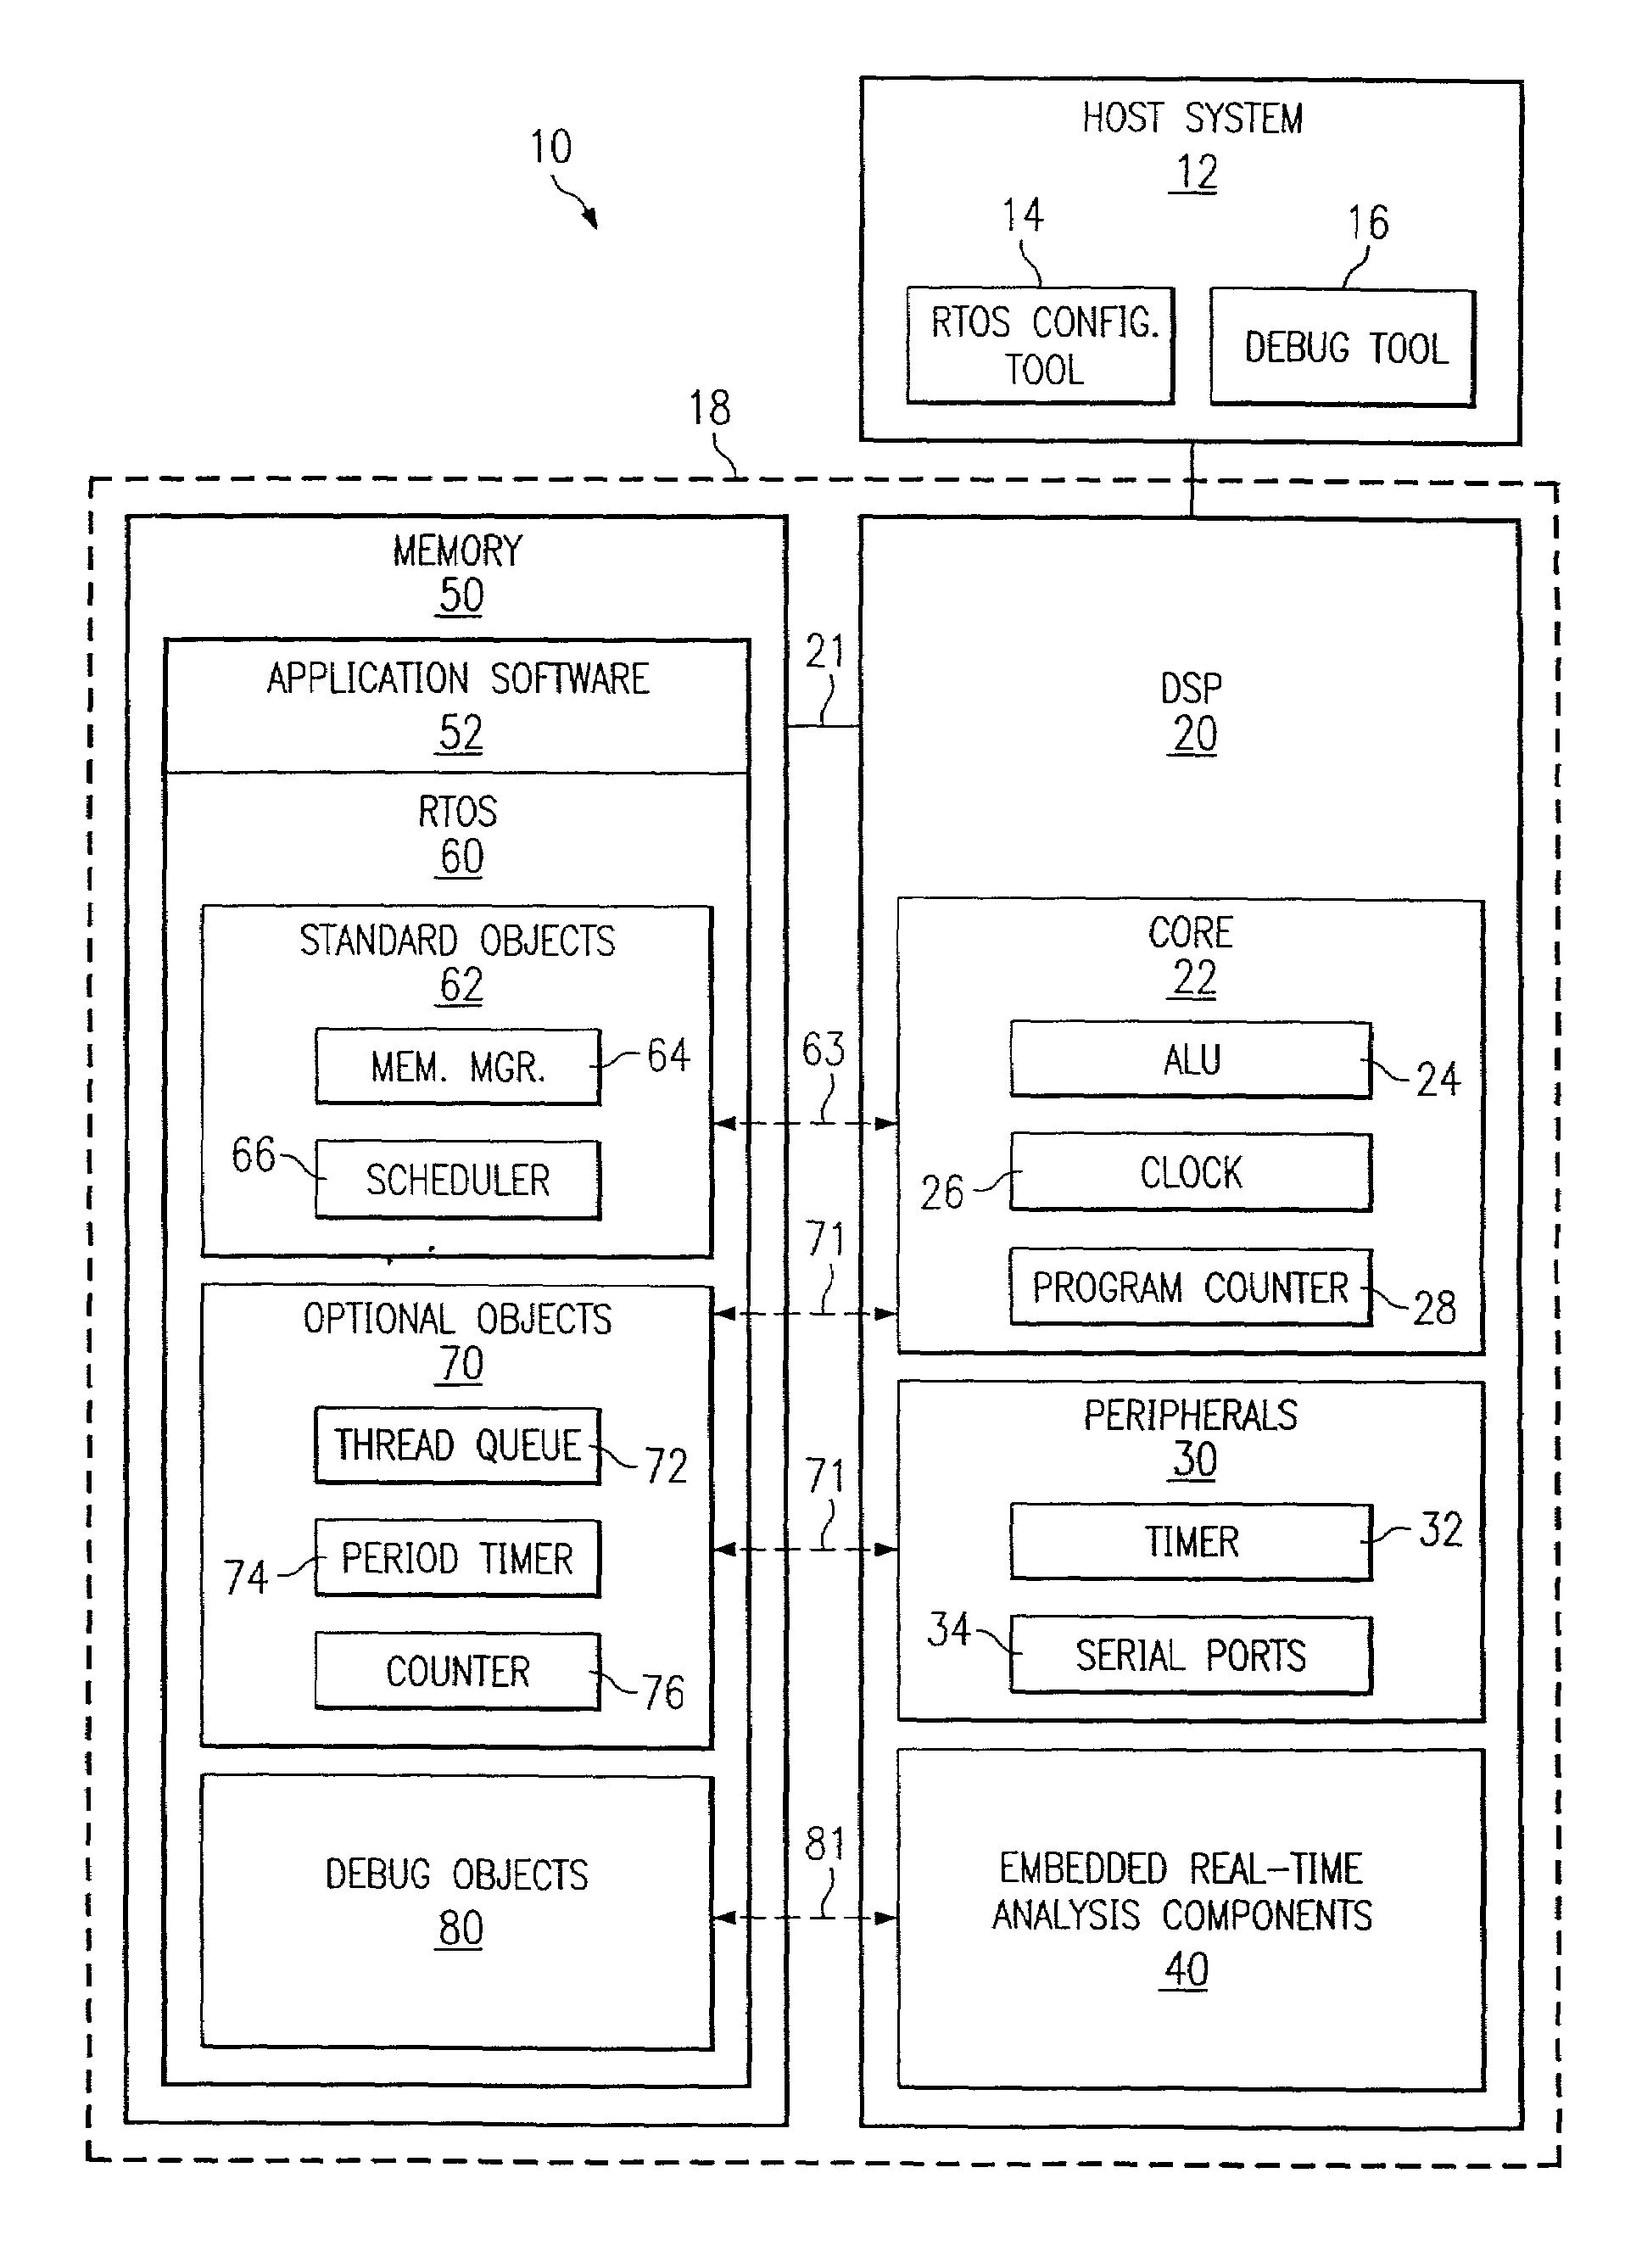 Method using embedded real-time analysis components with corresponding real-time operating system software objects